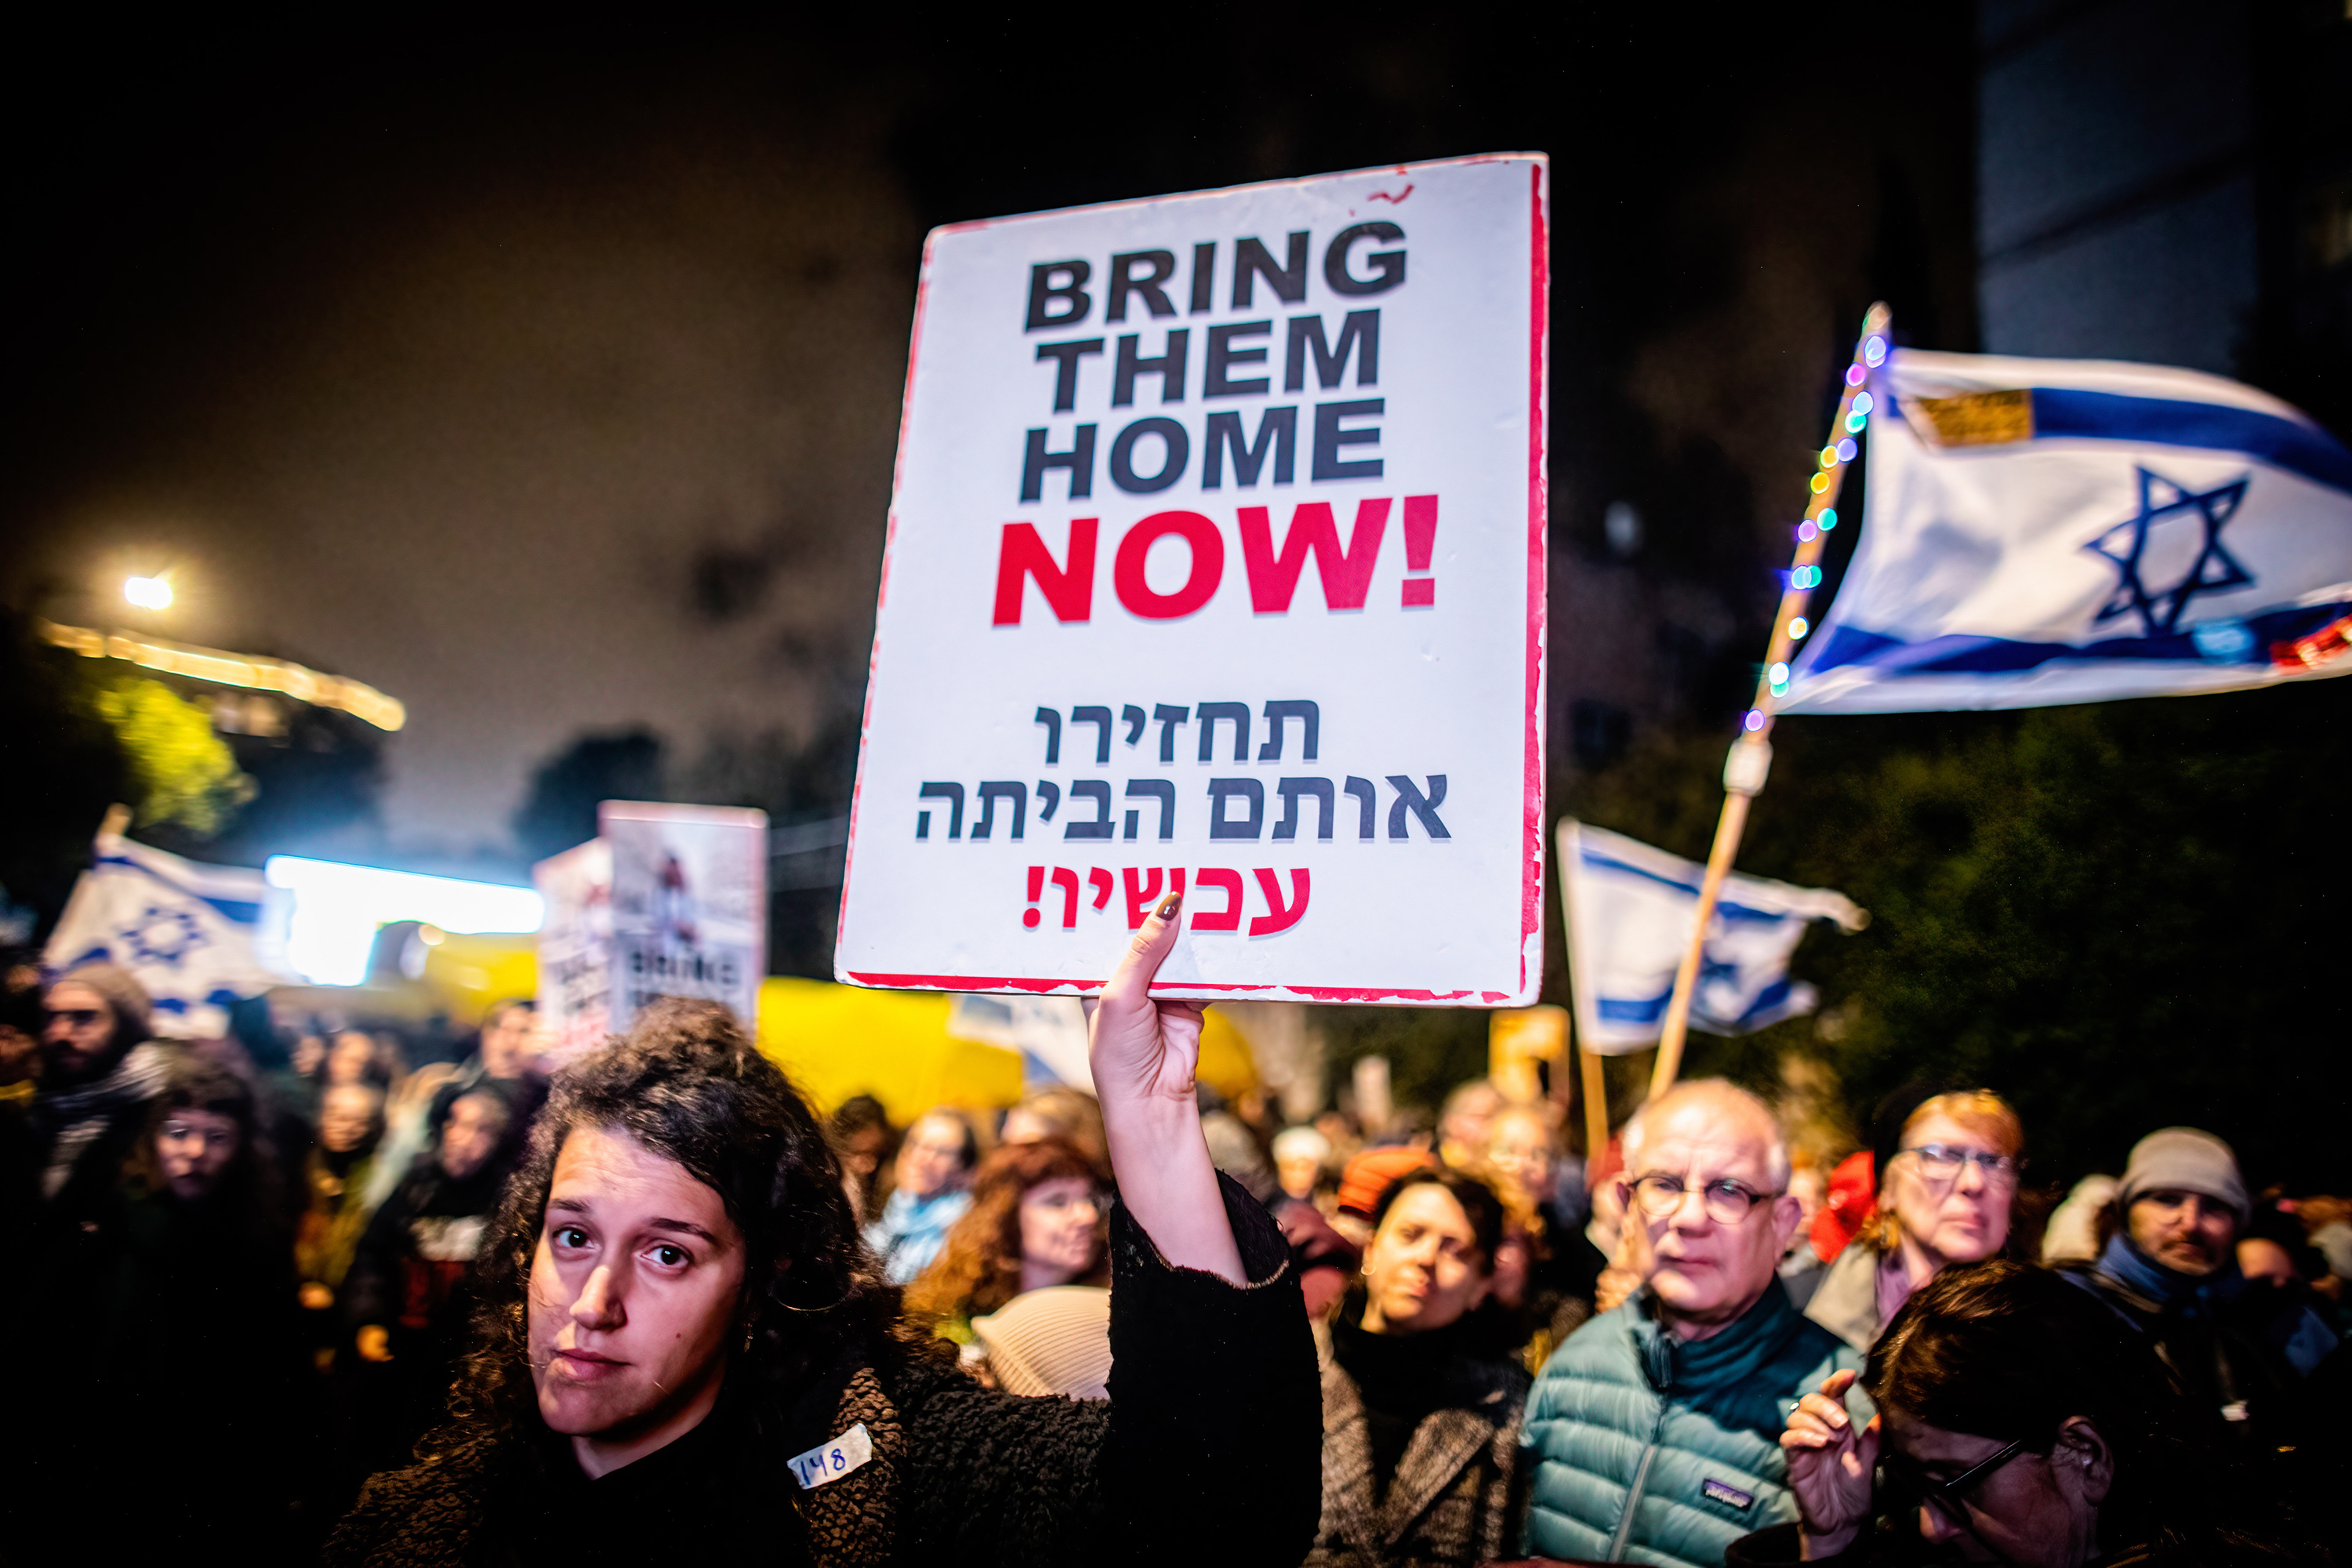 A protester holds a placard that says "Bring them home now!" during a demonstration march on March 2, in Jerusalem, Israel, demanding the release of hostages taken on October 7 by Hamas.